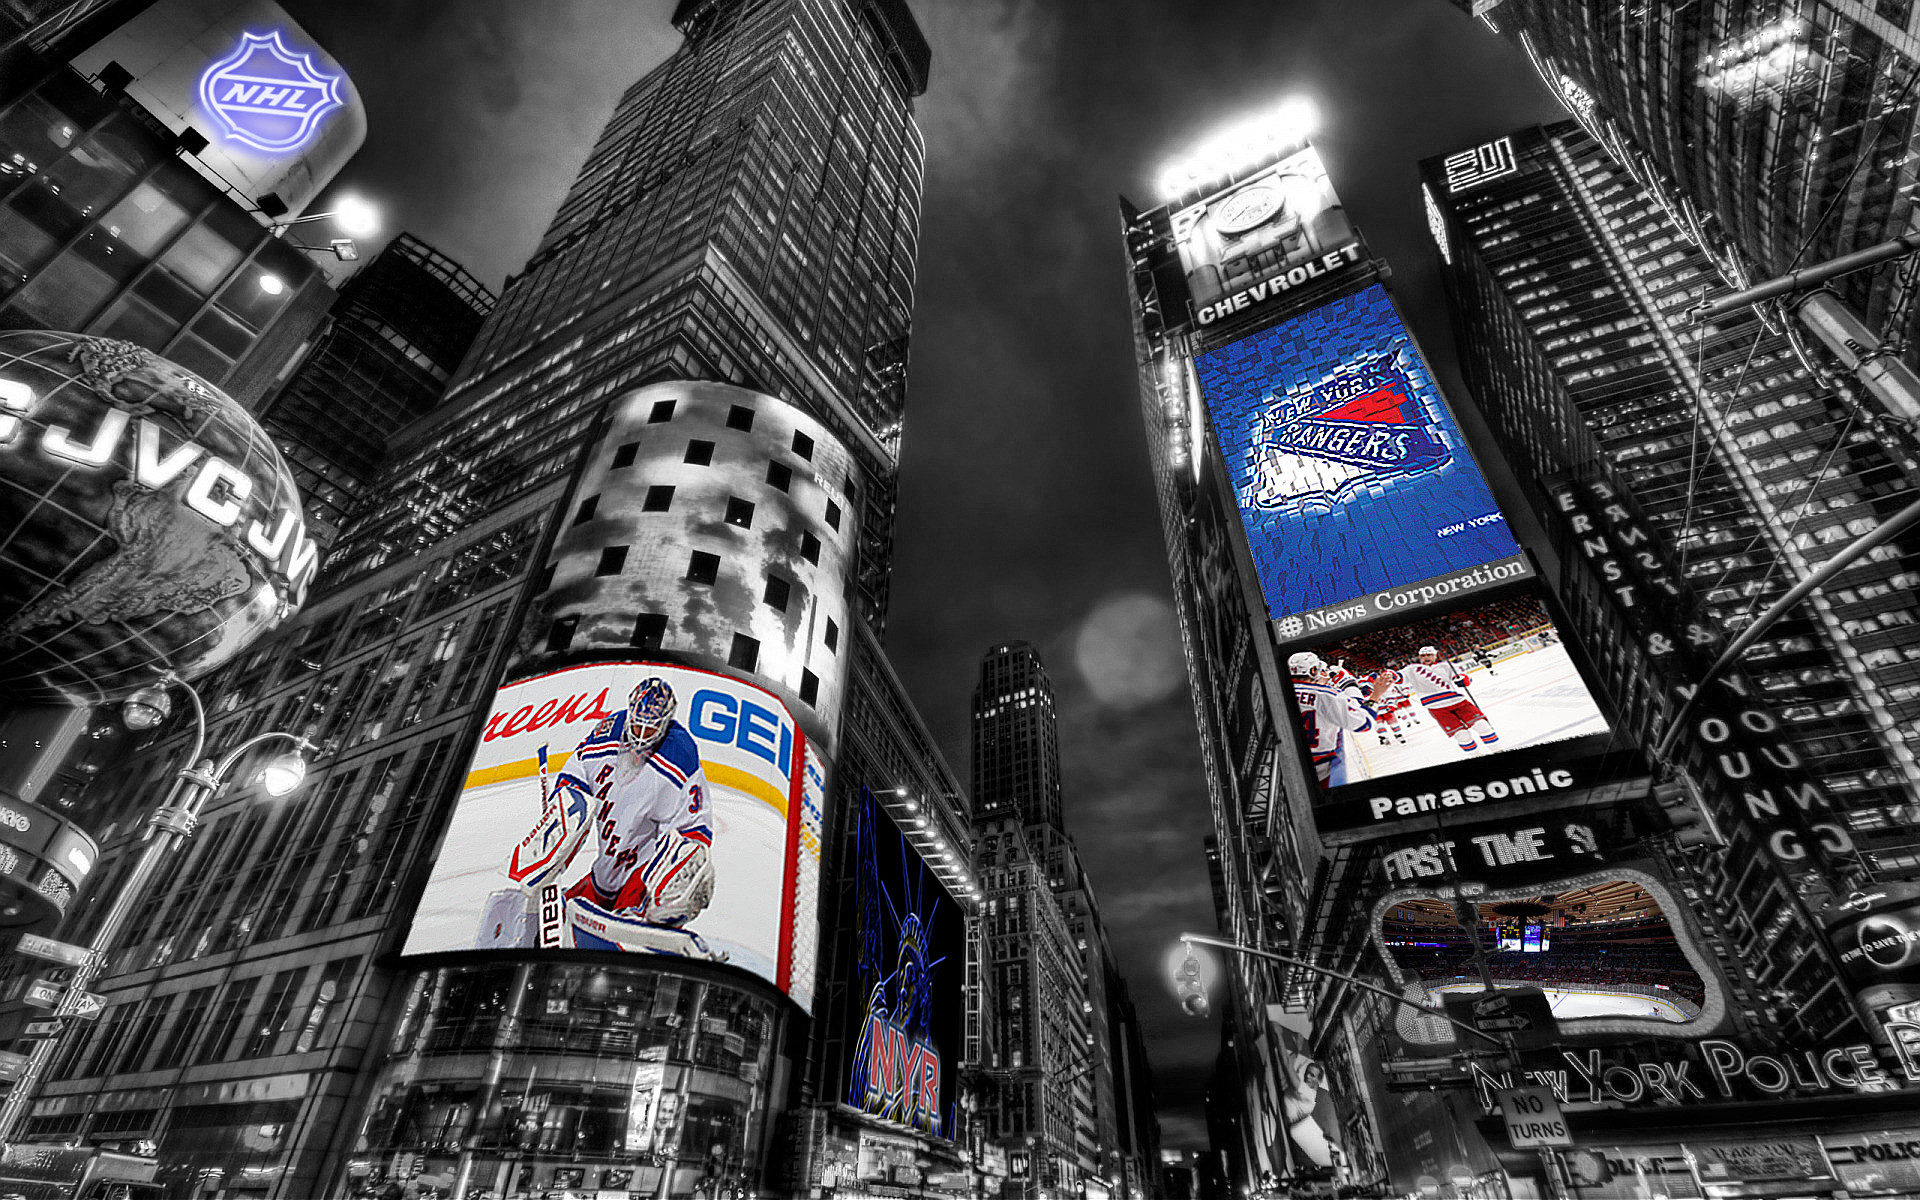 Pin by André Donadio on New York Rangers  Nhl wallpaper, New york rangers,  Rangers hockey